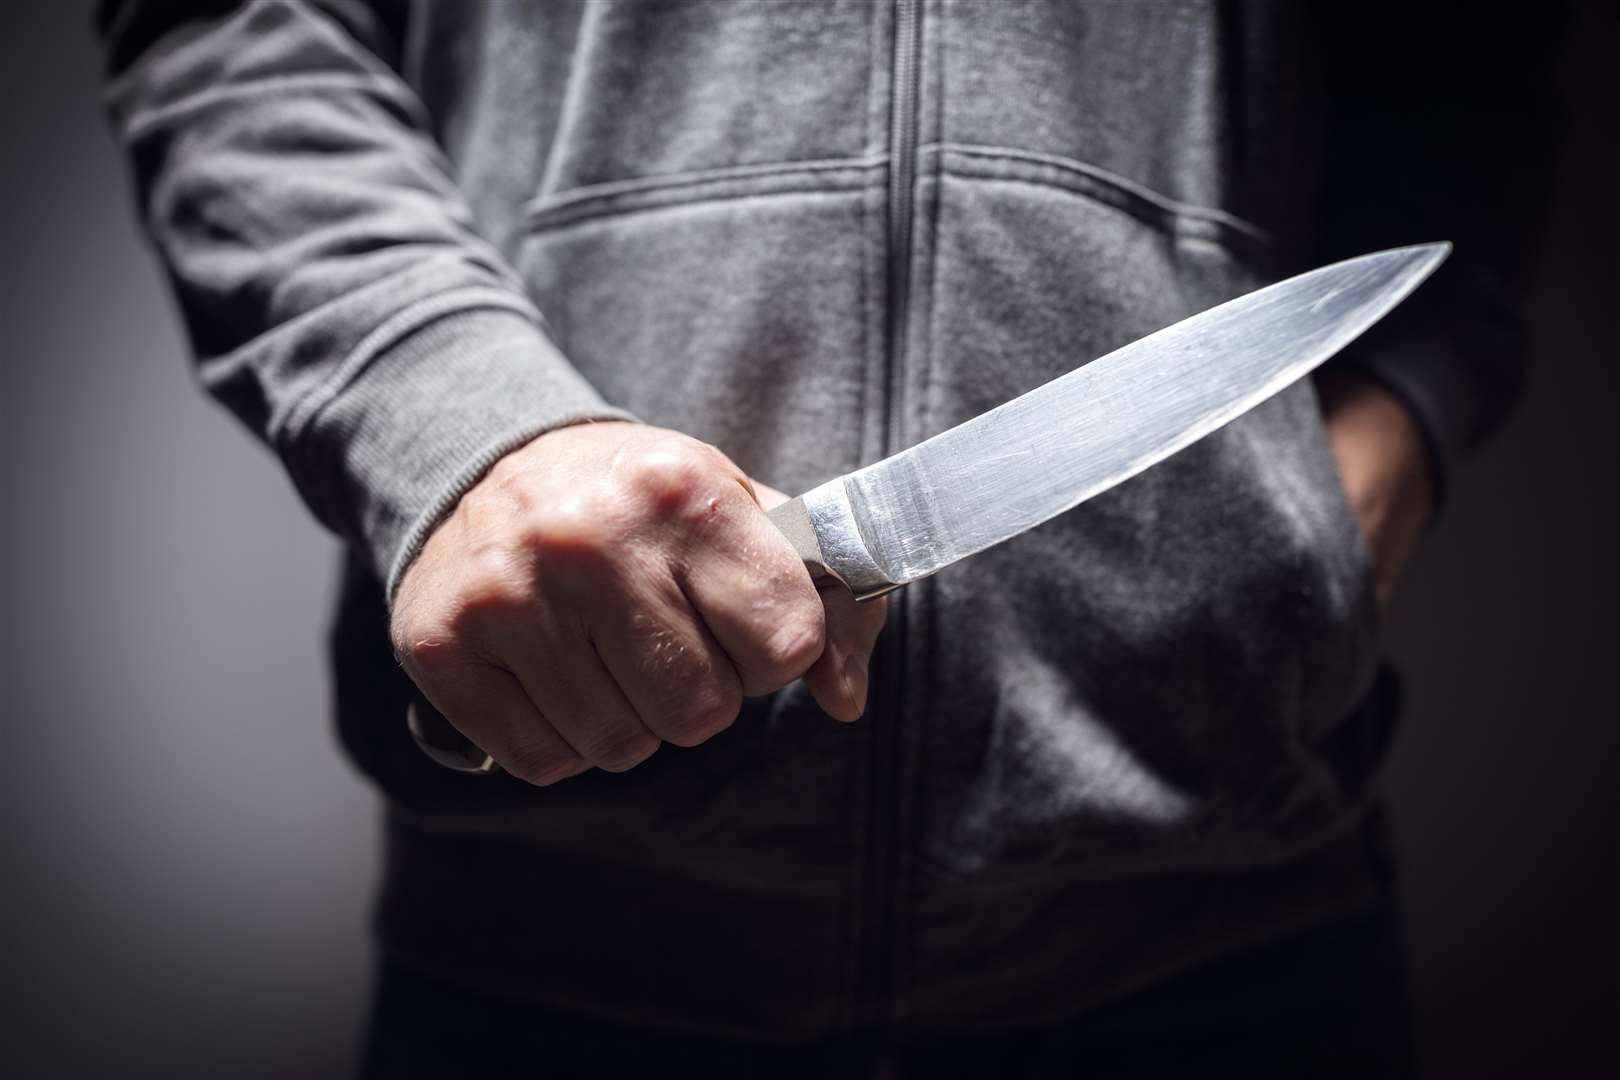 The teenage boy was threatened with a knife